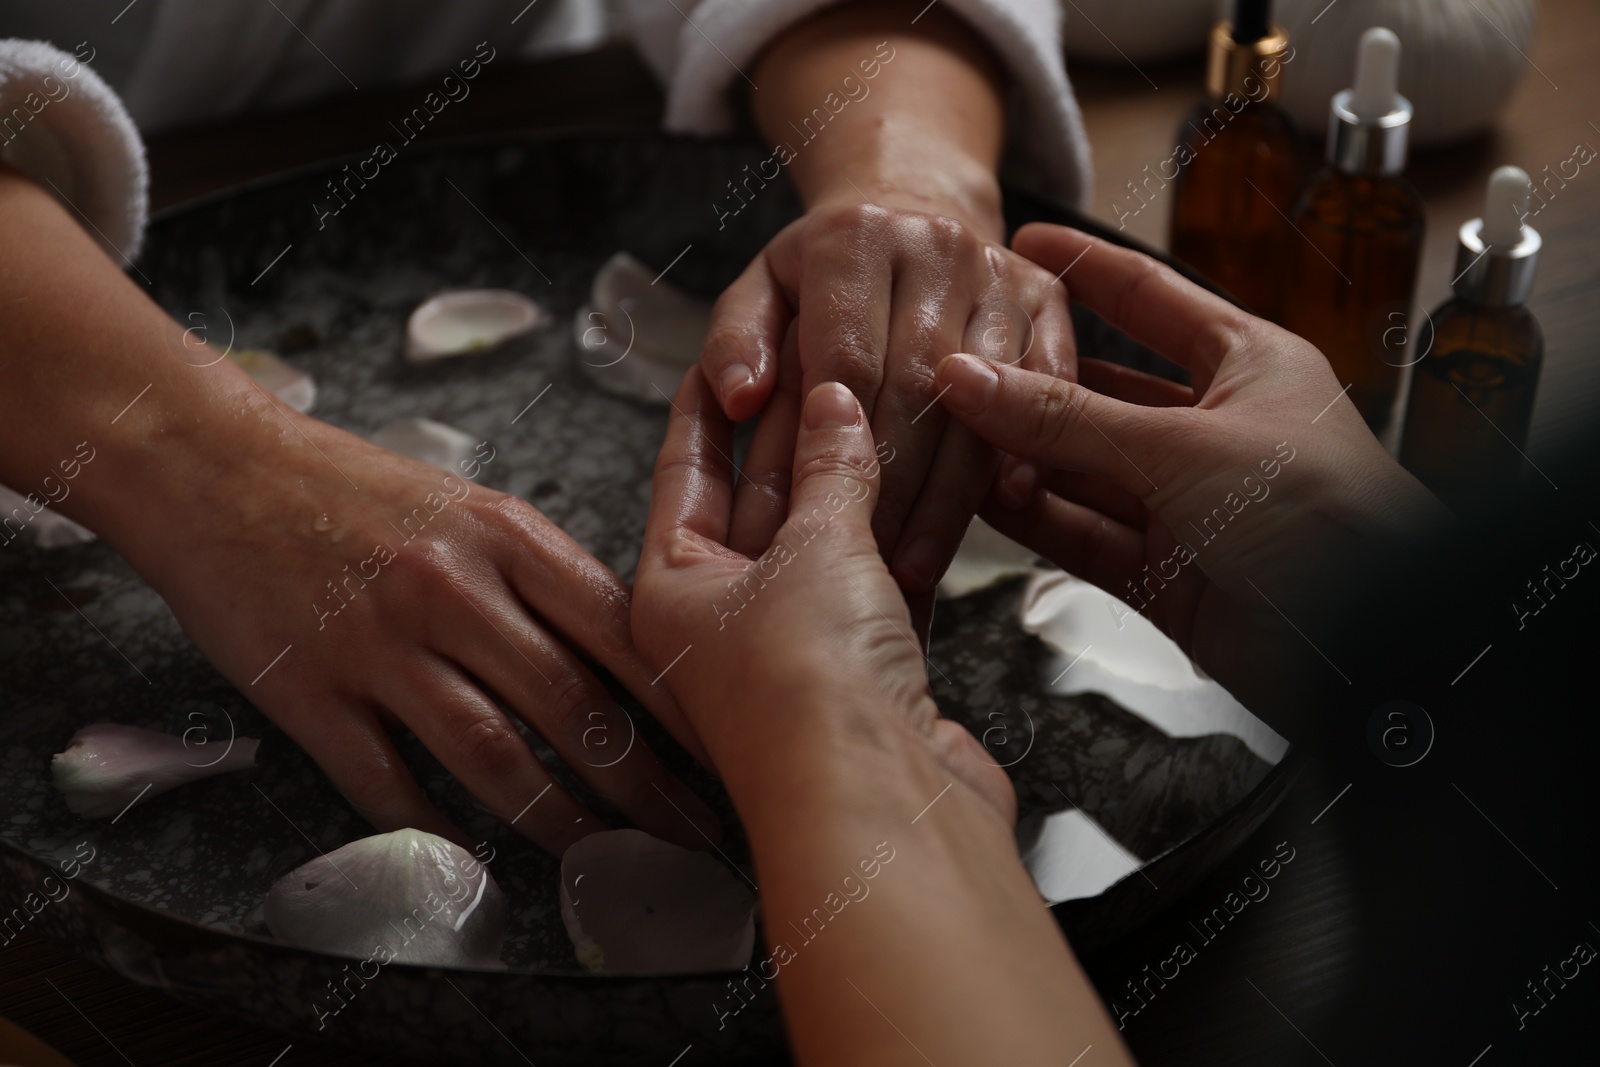 Photo of Woman receiving hand massage in spa salon, closeup. Bowl of water and flower petals on table